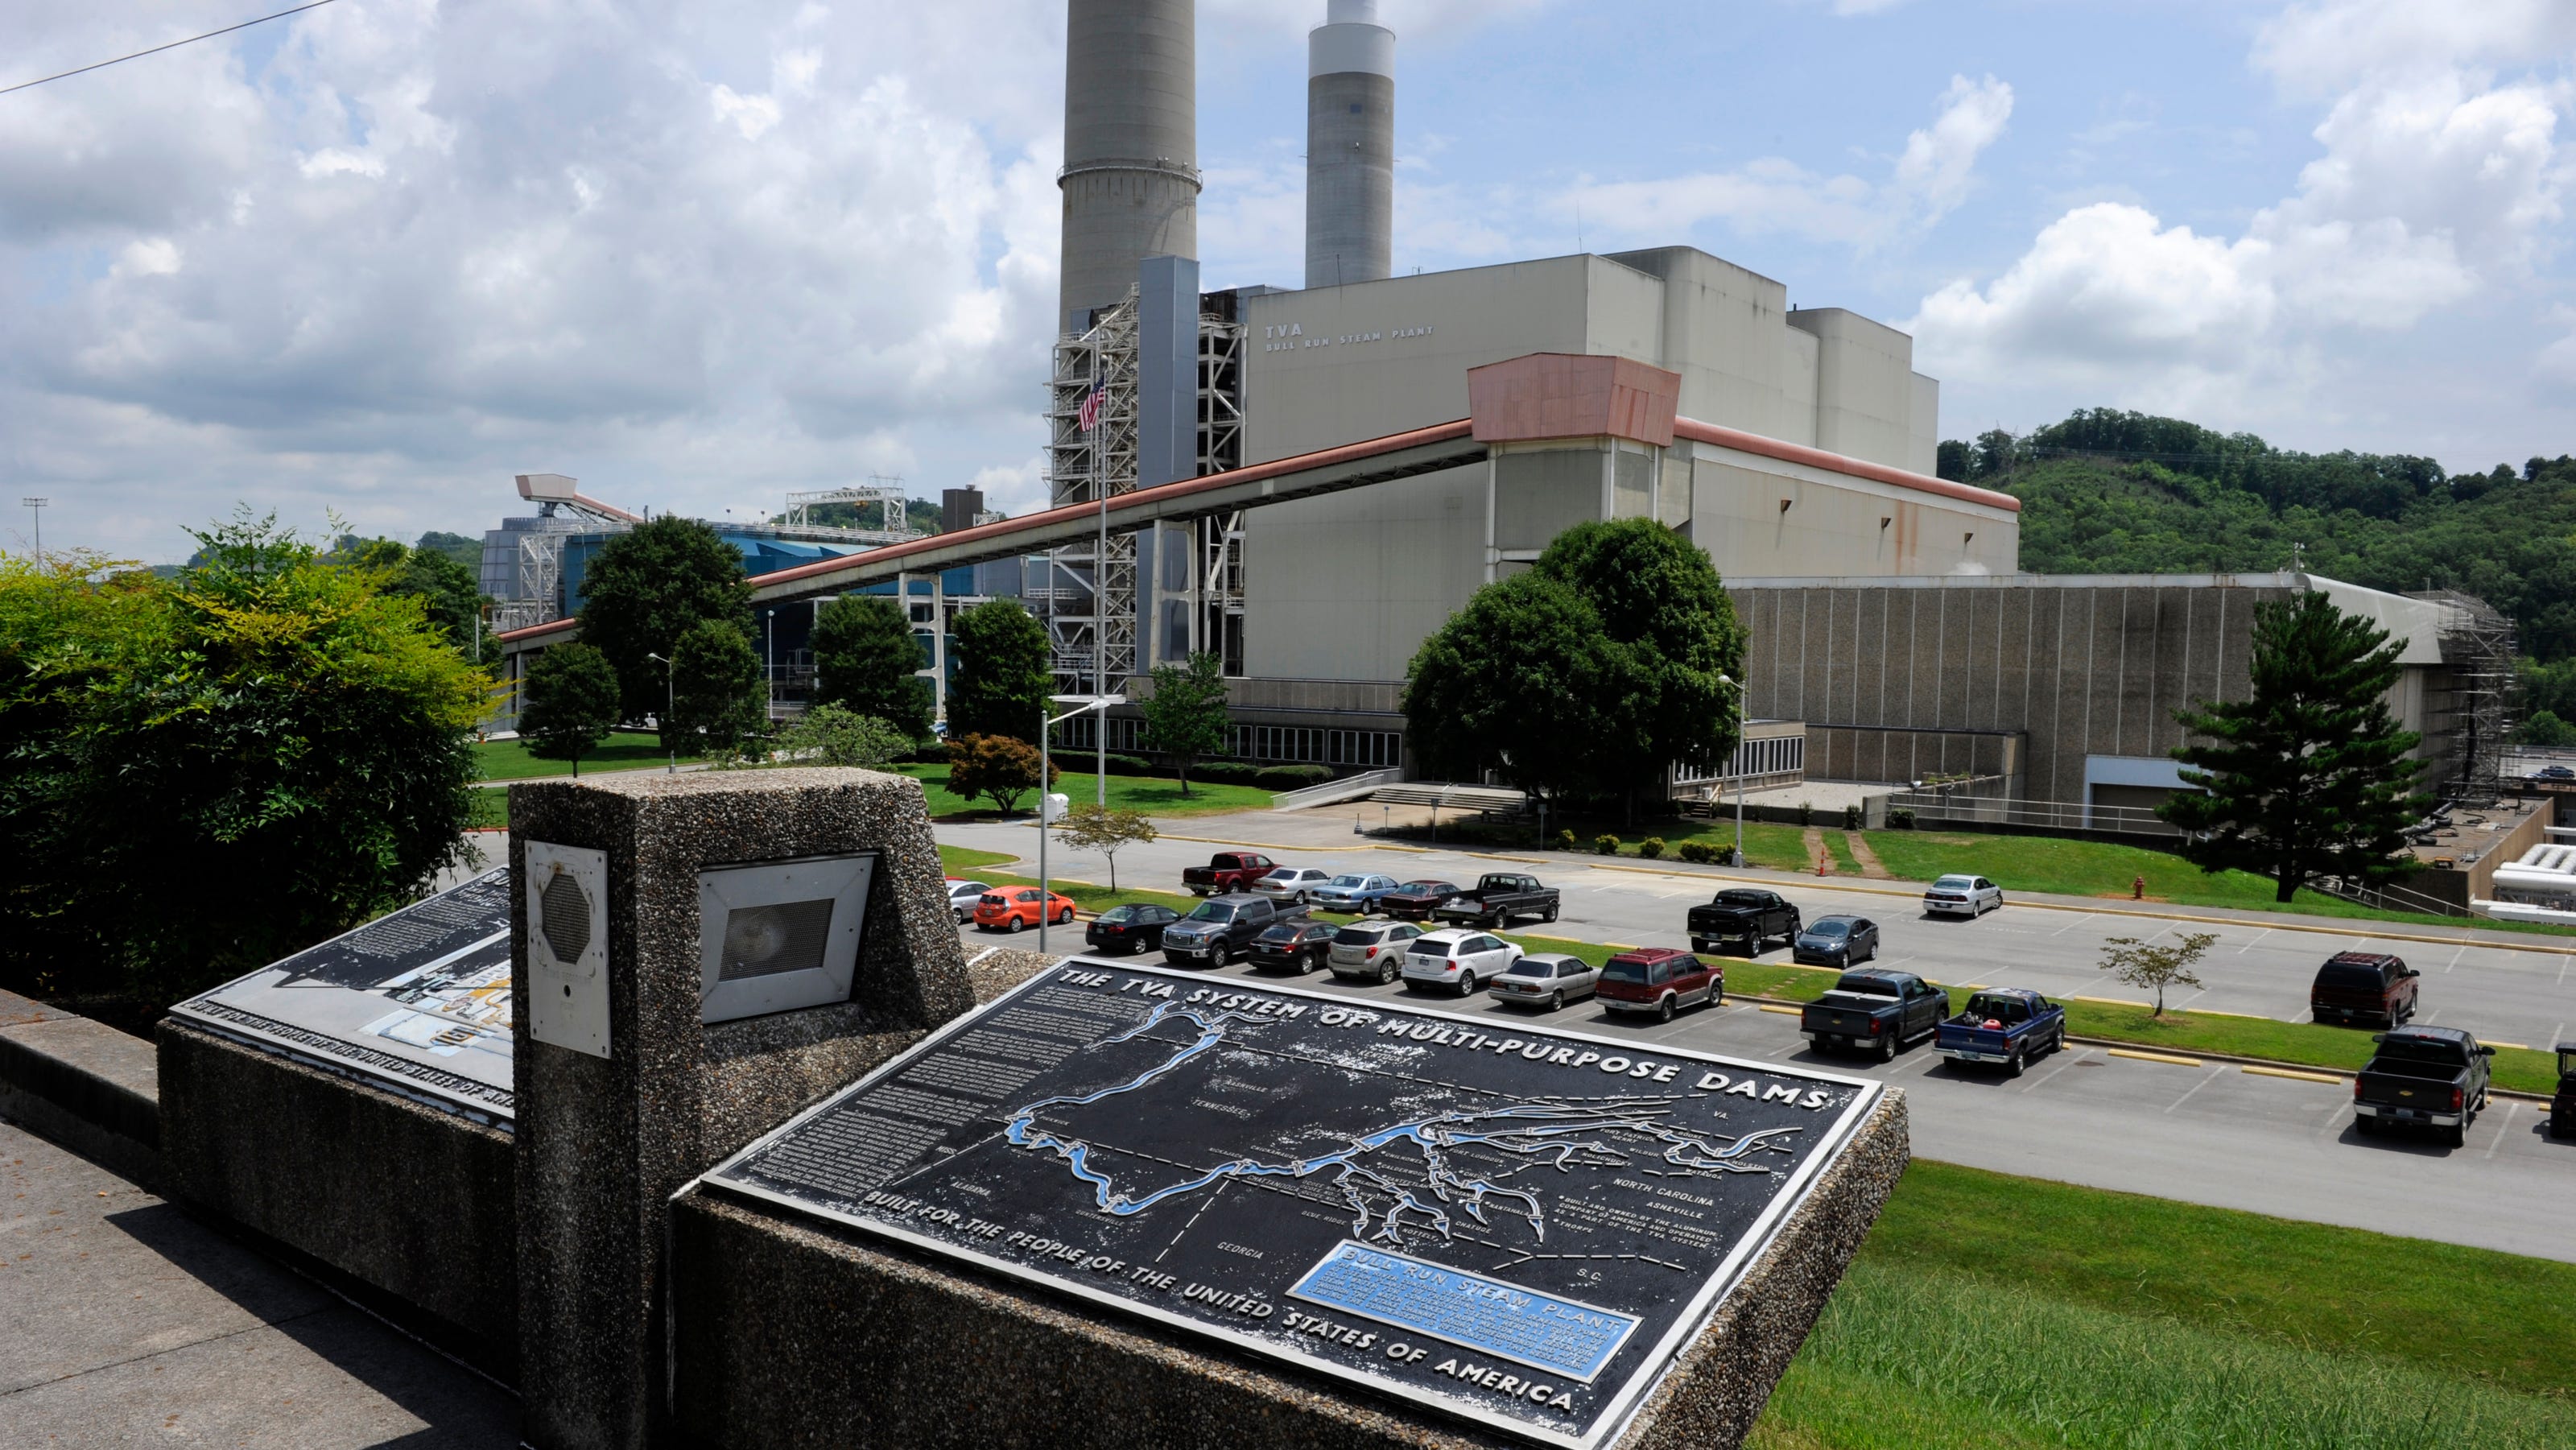 TVA agrees to recommendations to improve safety at Bull Run power plant